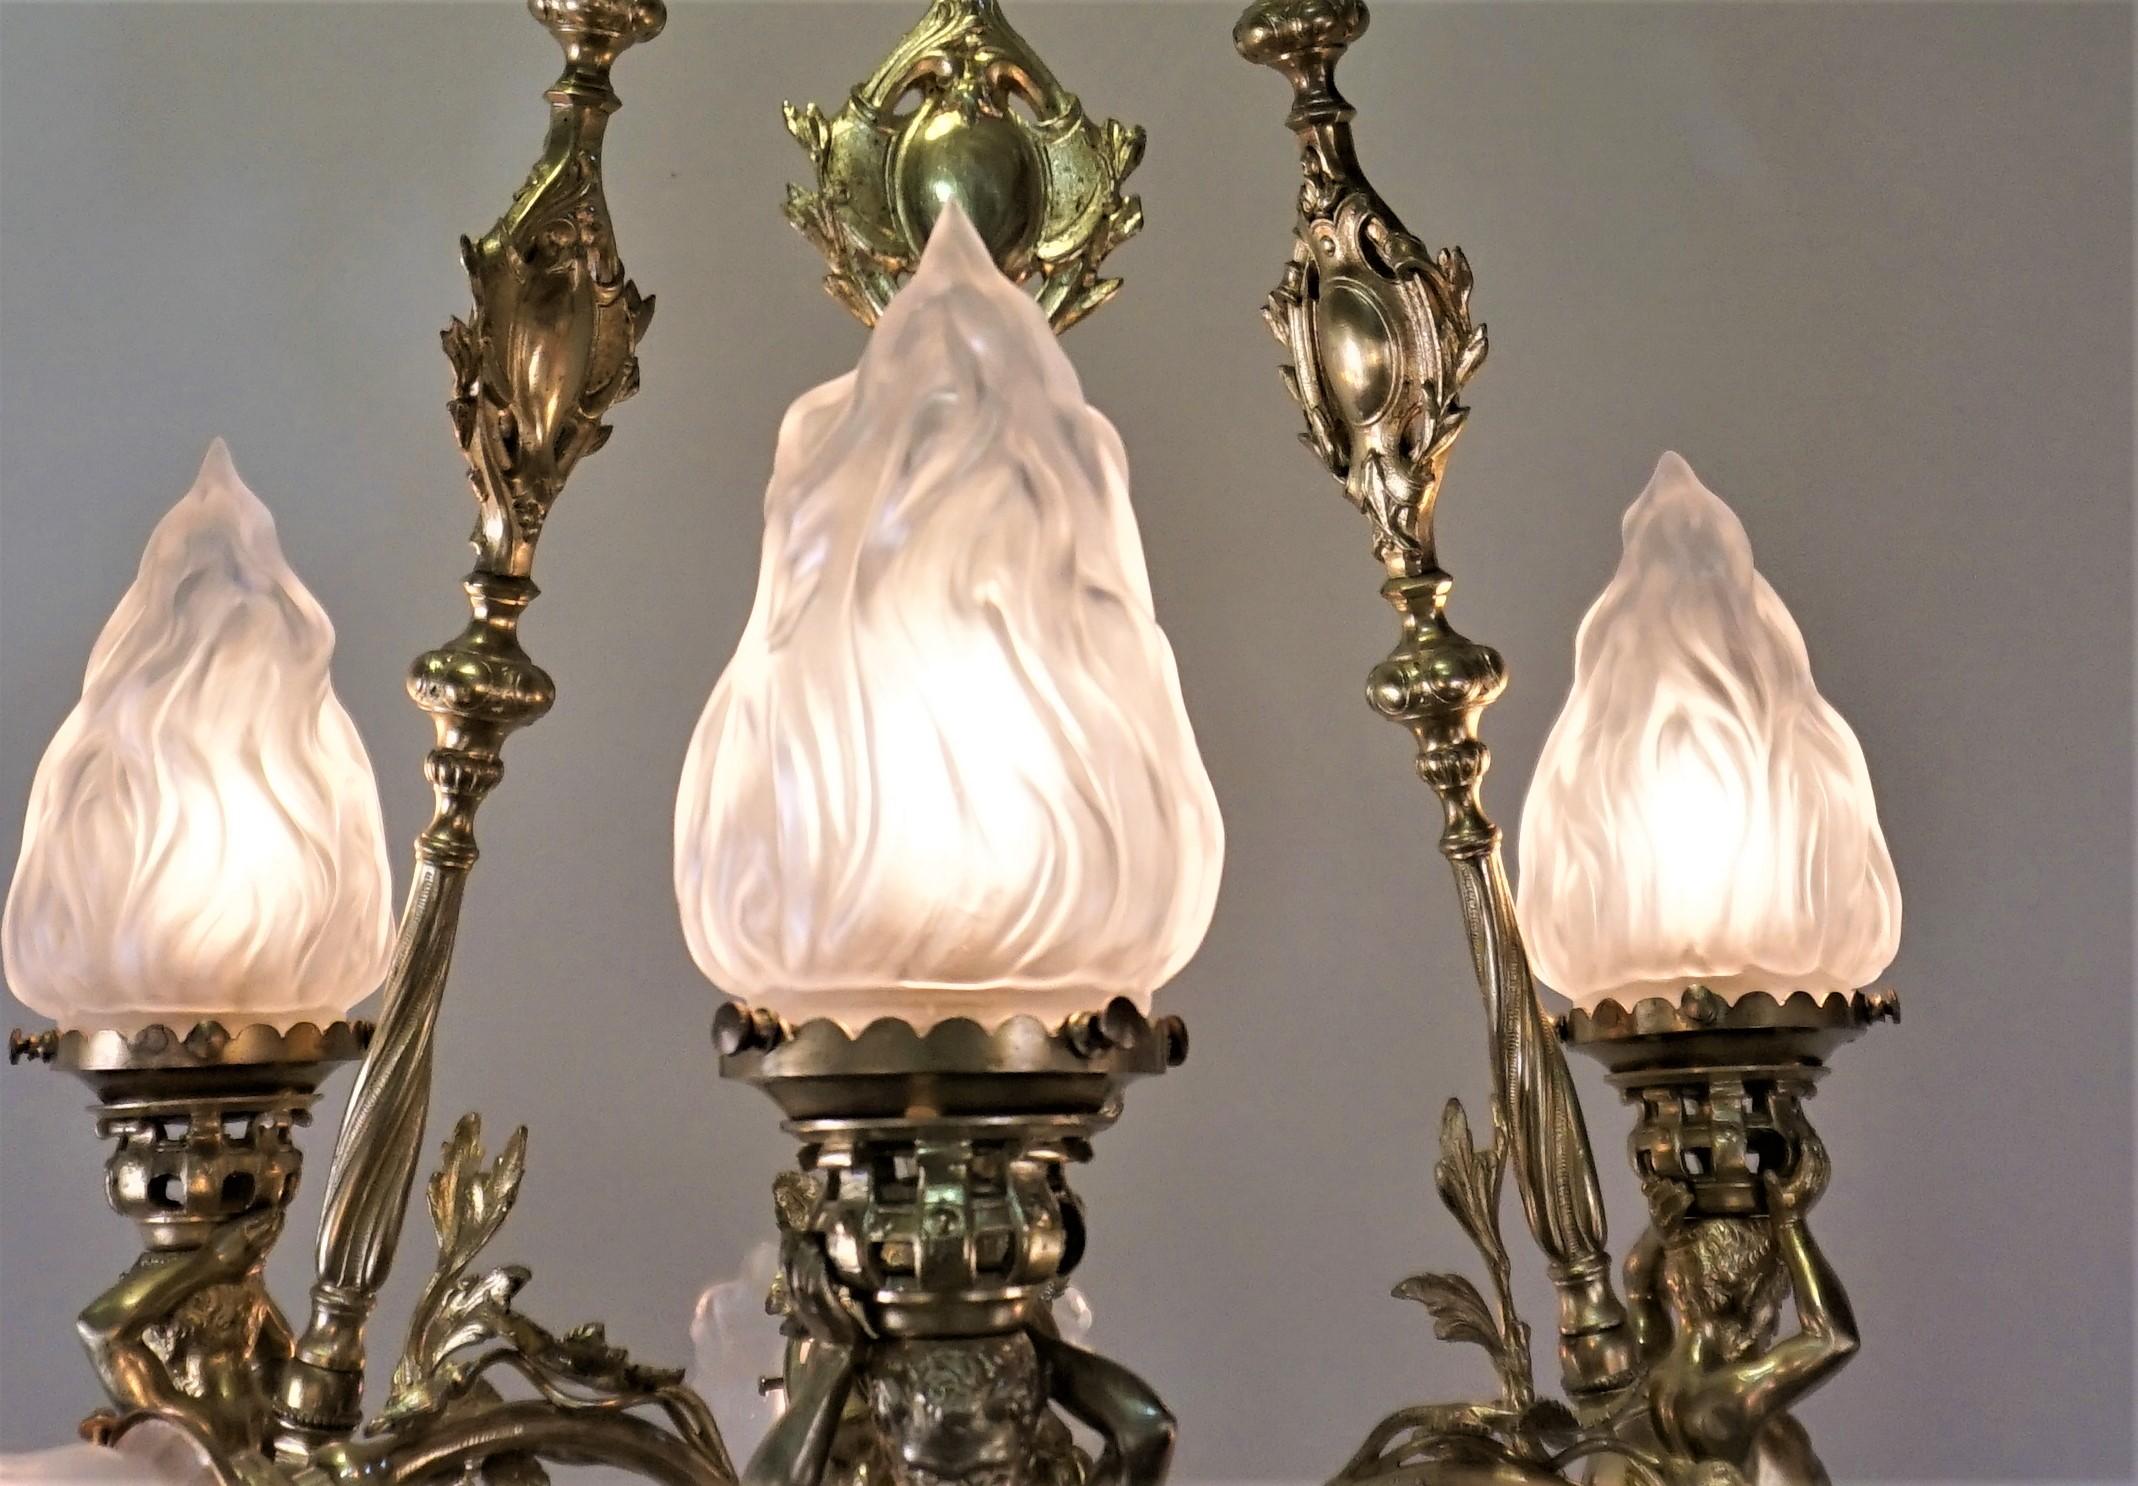 French, circa 1900-1910 six-light bronze sculpture chandeliers with flame and flora glass shades.